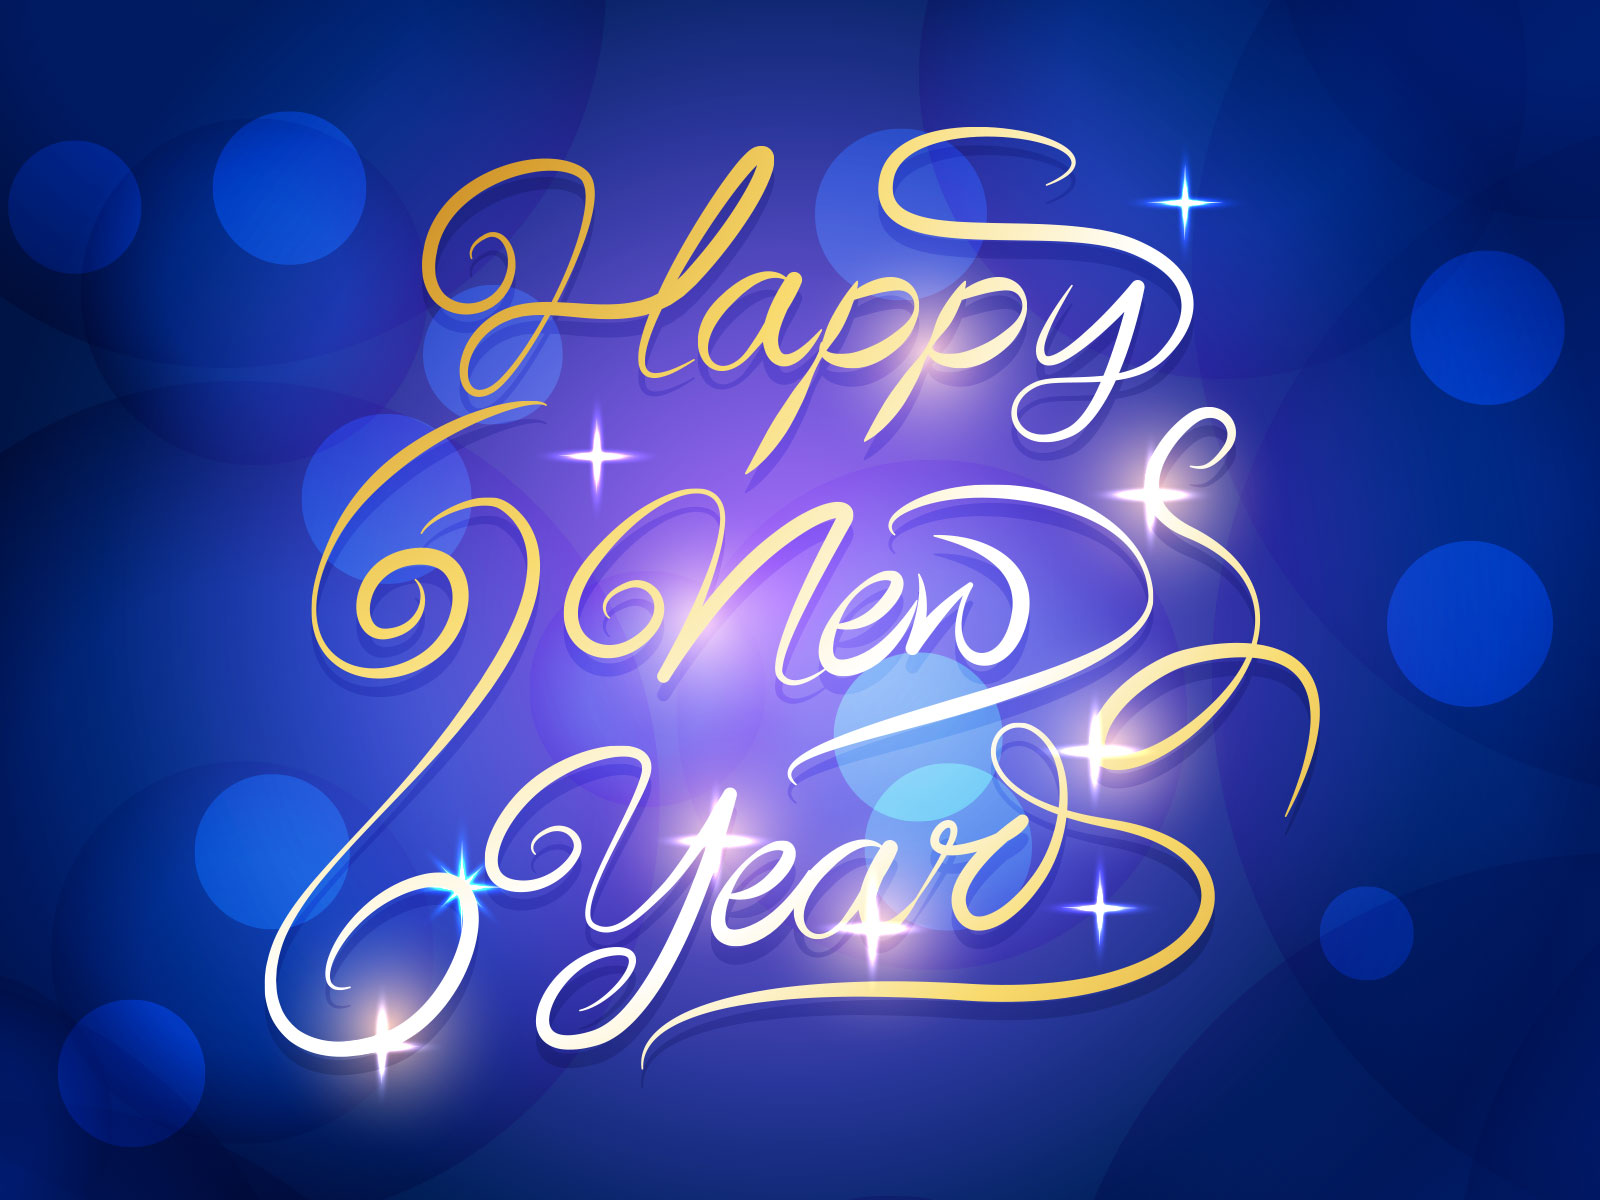 Happy New Year 2015 Wallpaper HD1 Happy New Year 2015 Wallpapers